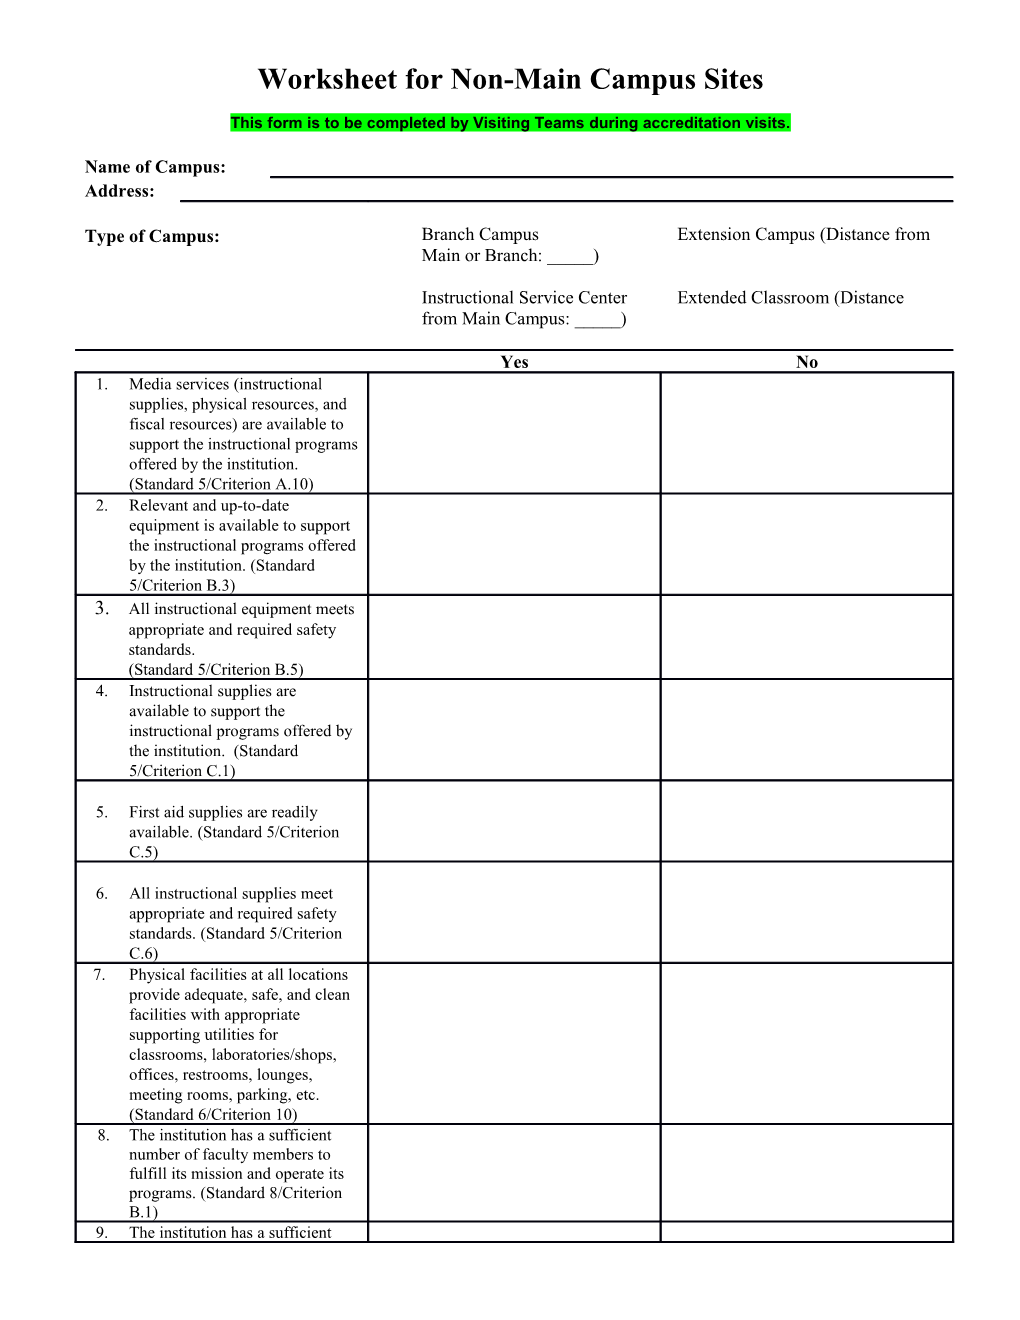 Worksheet for Non-Main Campus Sites